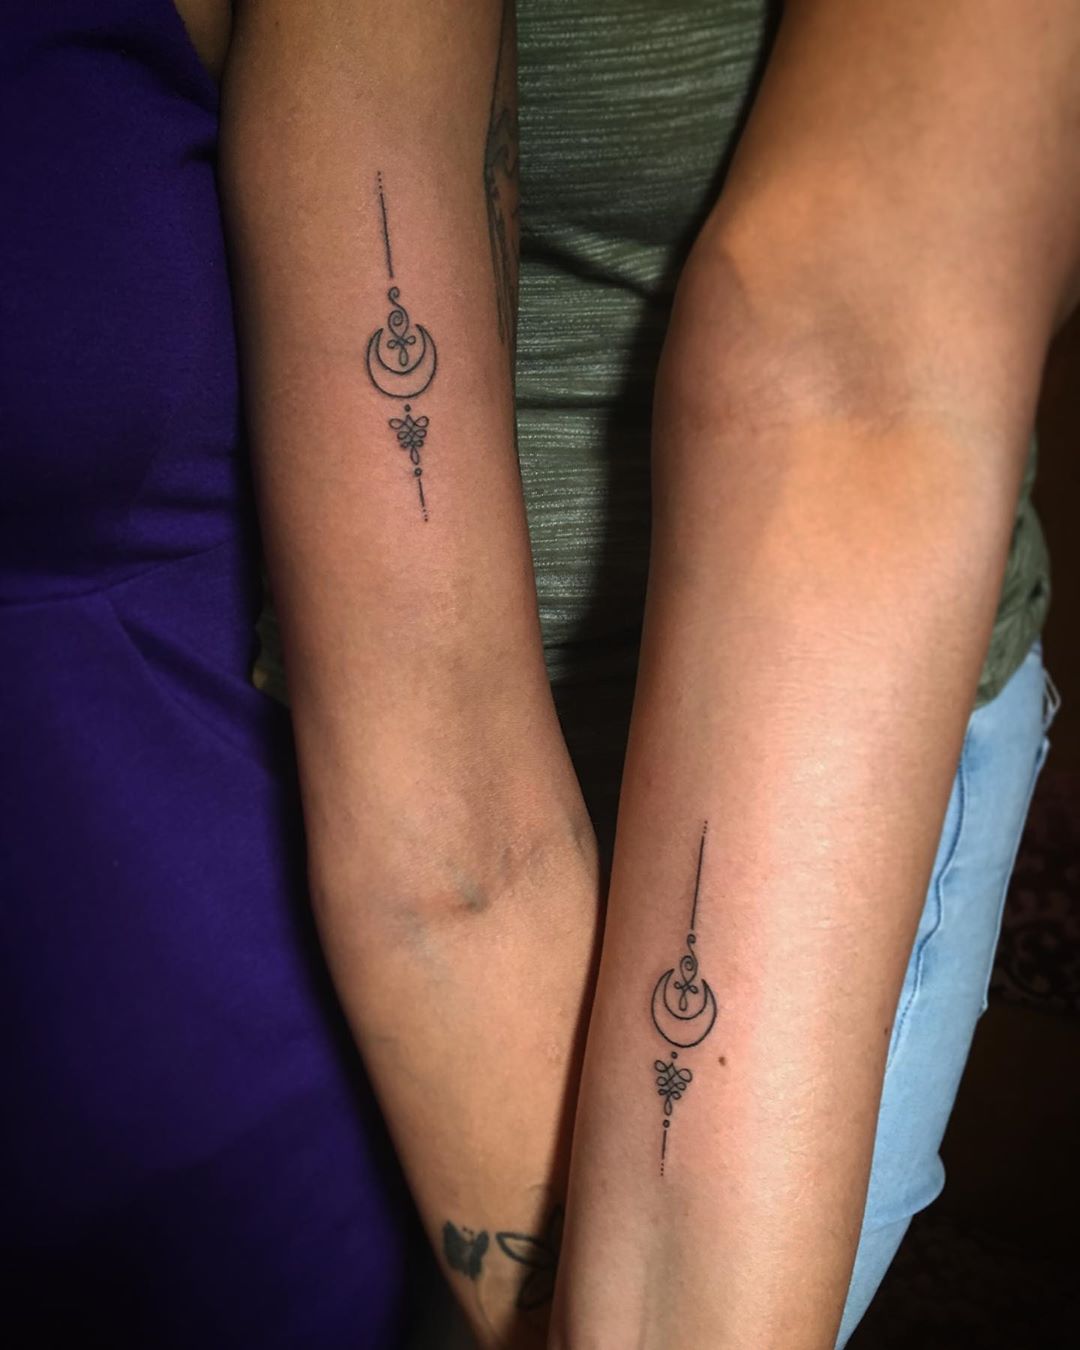 Sister Tattoo Ideas | Designs for Sister Tattoos